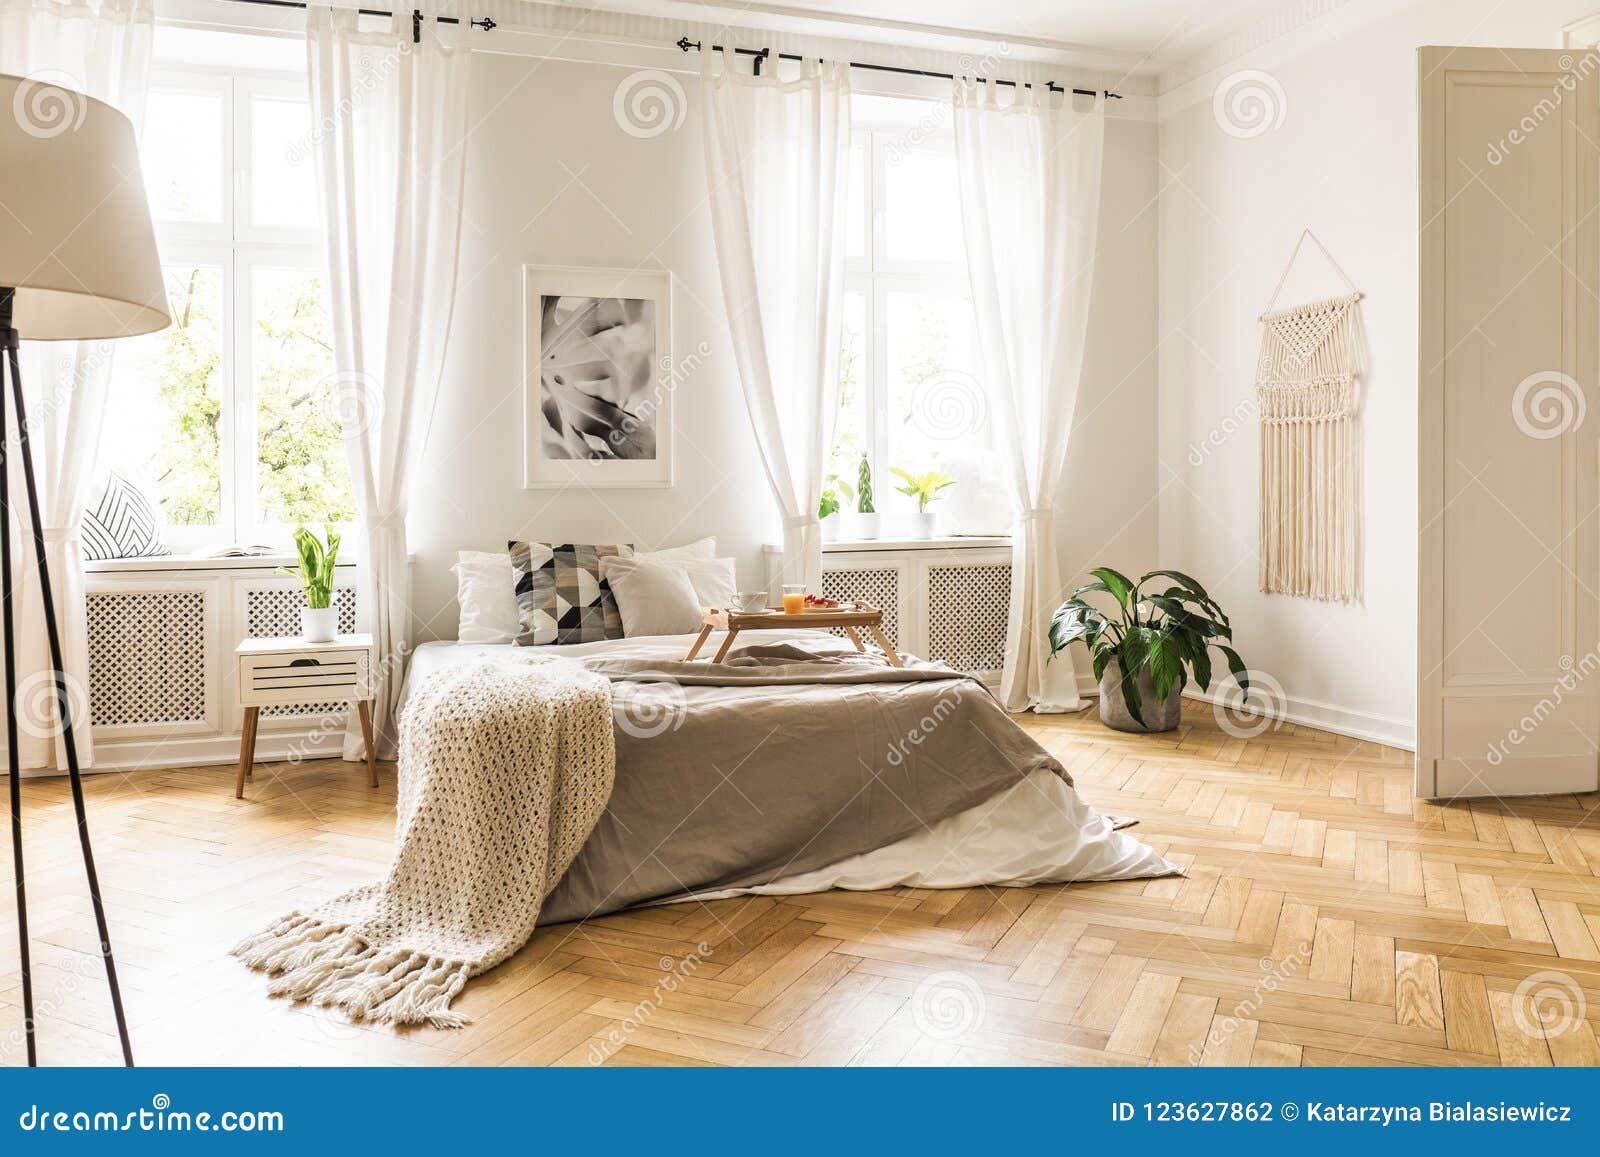 framed poster on a white wall above a cozy double bed with beige